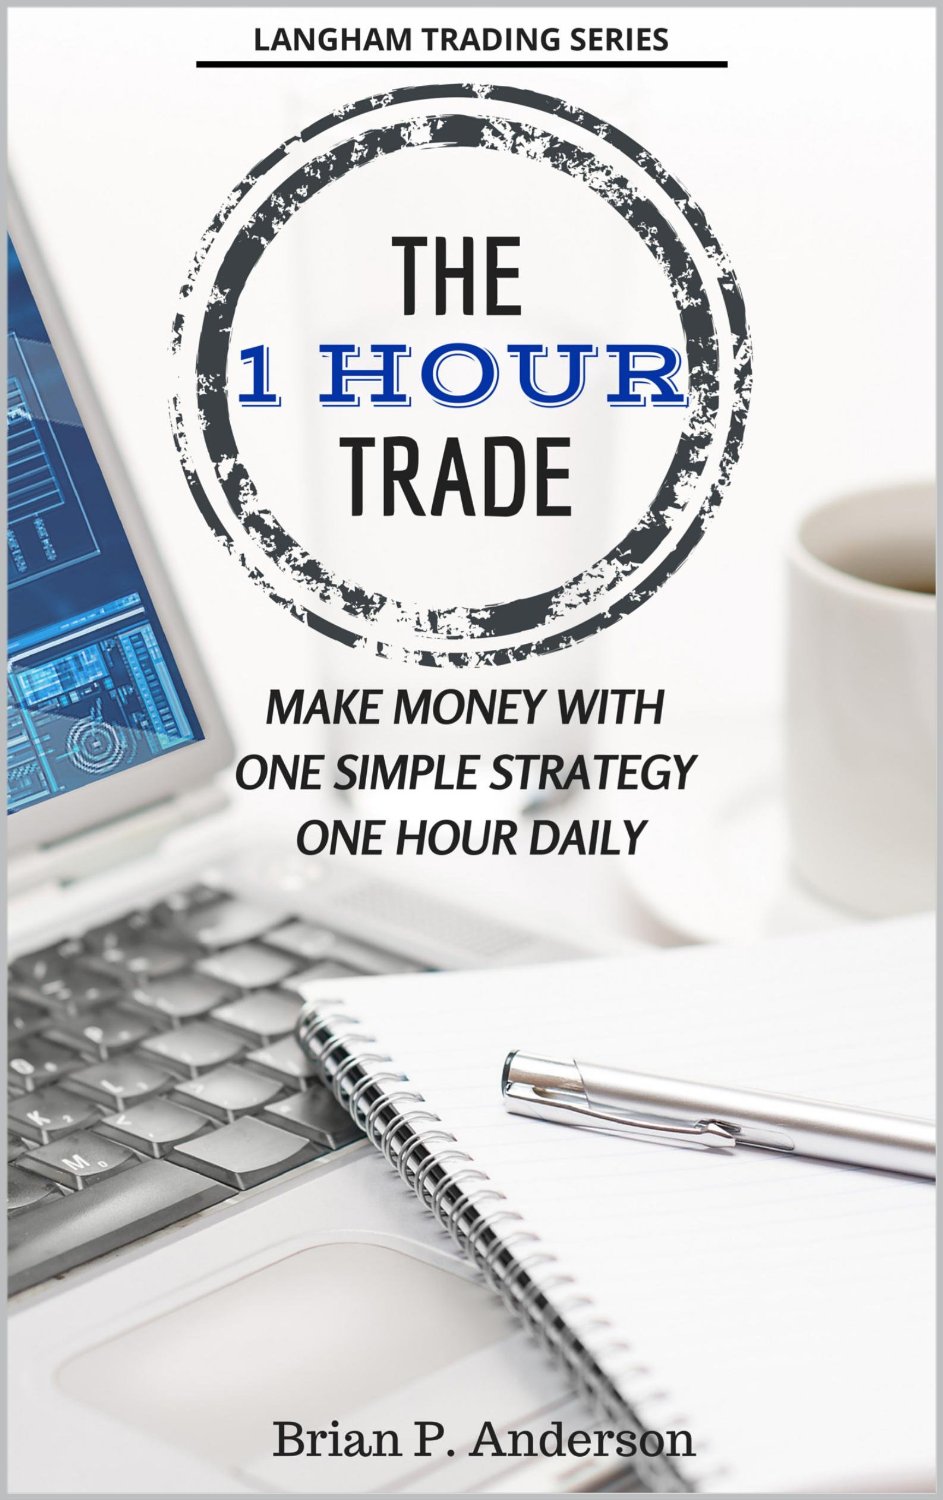 The 1 Hour Trade: Make Money With One Simple Strategy, One Hour Daily